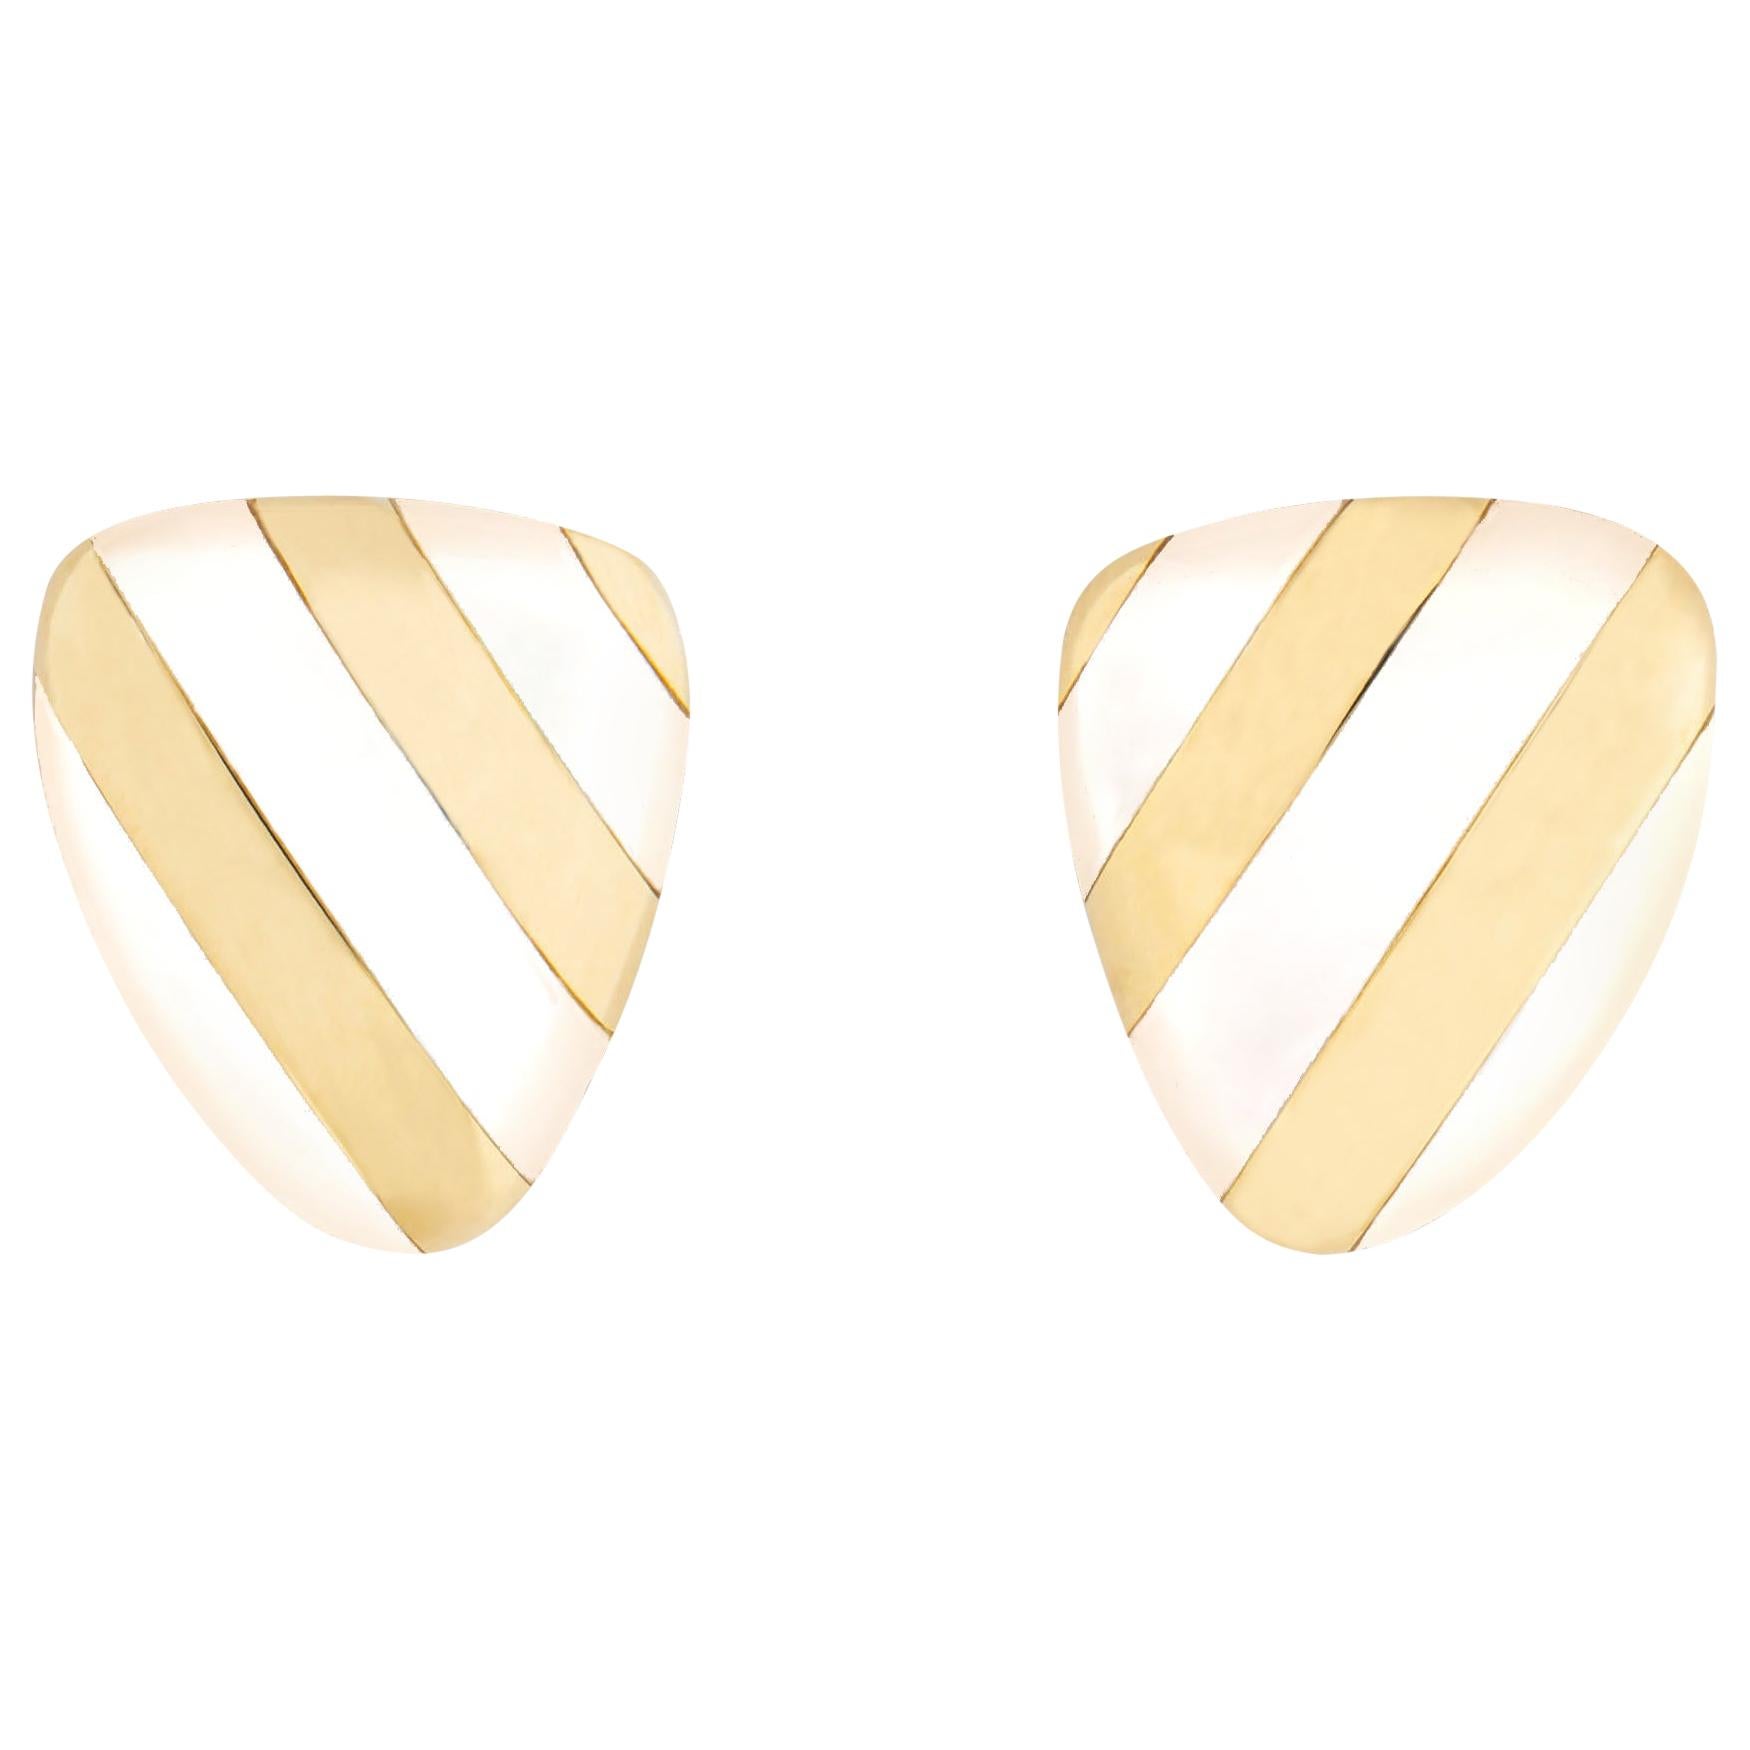 Tiffany & Co. Mother of Pearl and Gold Earrings